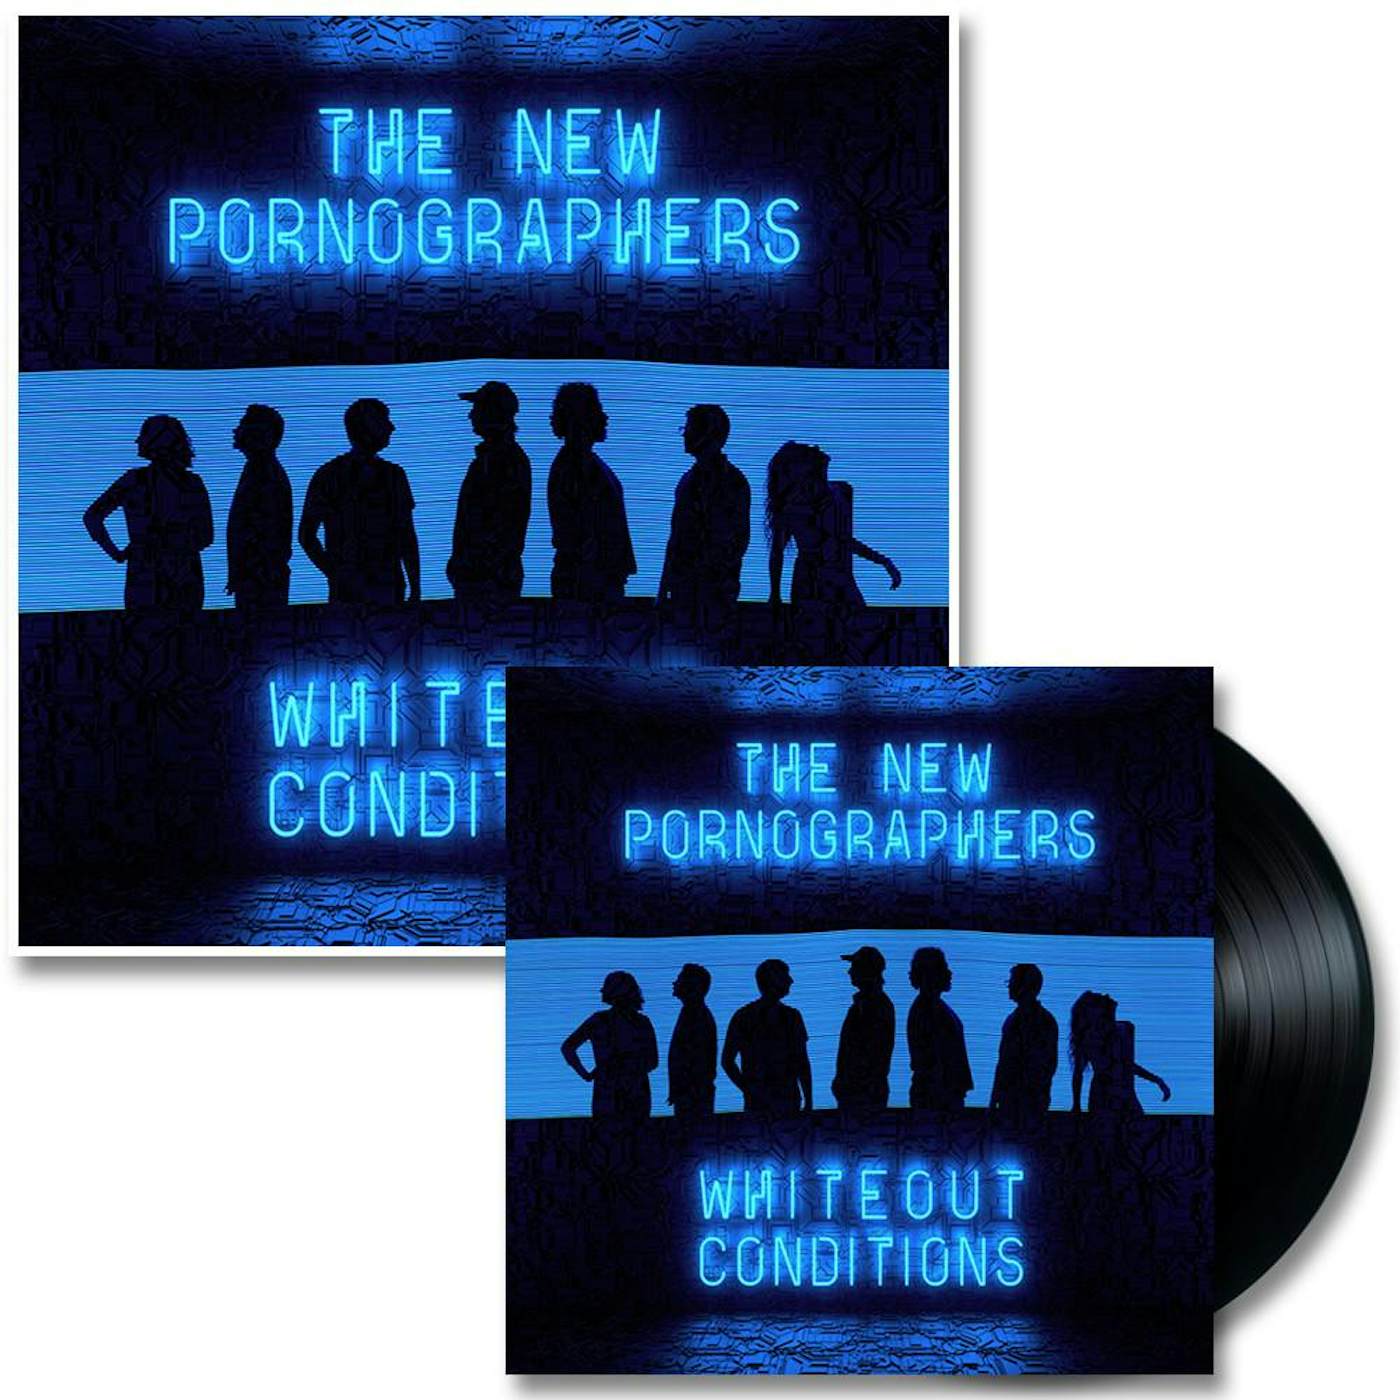 The New Pornographers Whiteout Conditions LP (Black) & Glow In The Dark Poster (Vinyl)